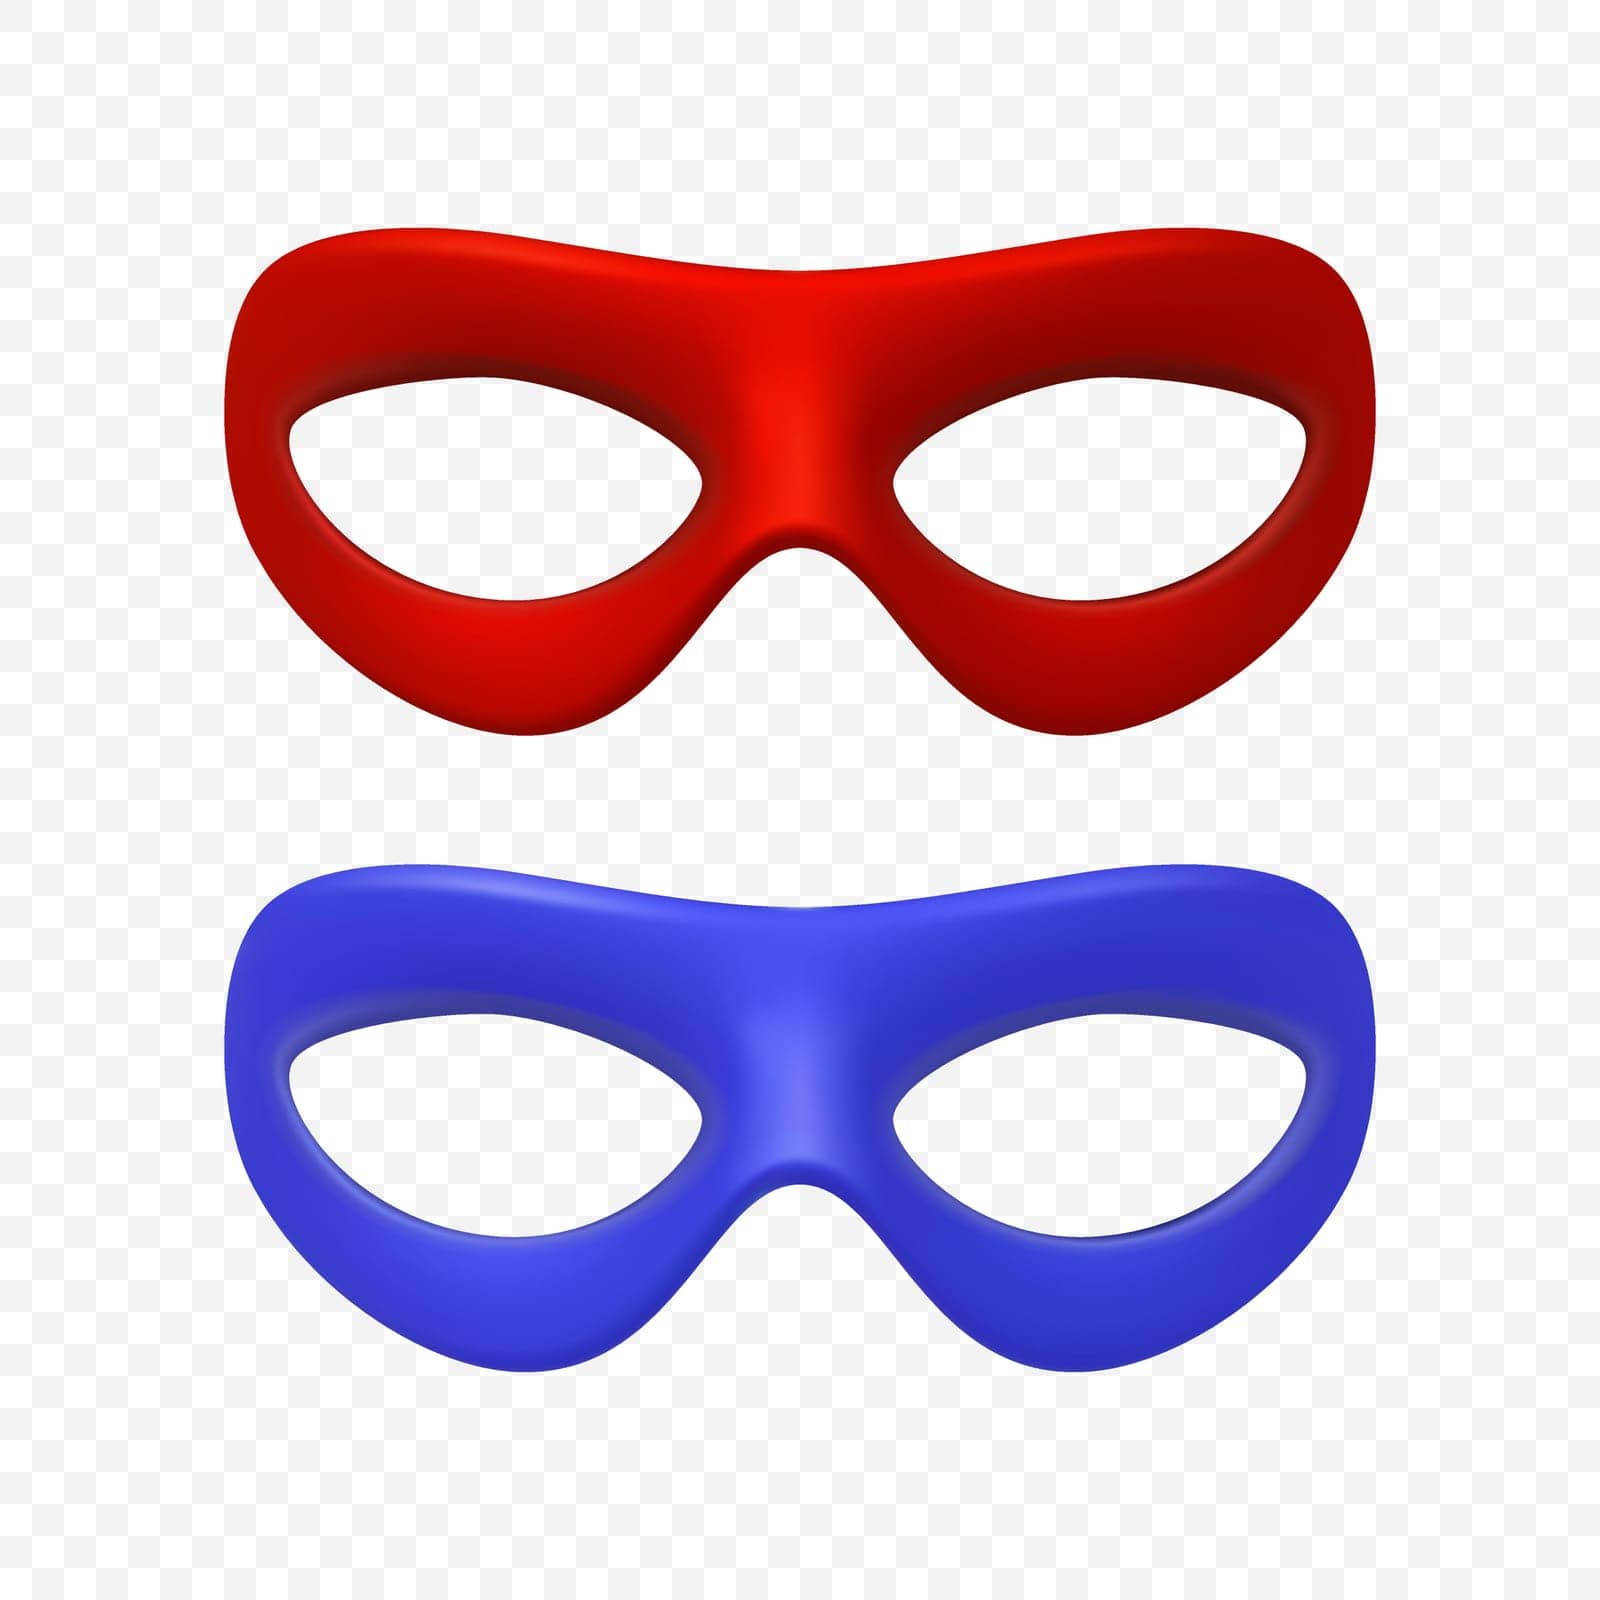 Vector Red and Blue Super Hero Mask Set. Face Character, Superhero Comic Book Mask Closeup. Superhero Photo Prop, Carnival Face Mask, Glasses. Comic Book Concept for Costume Parties and Events by Gomolach